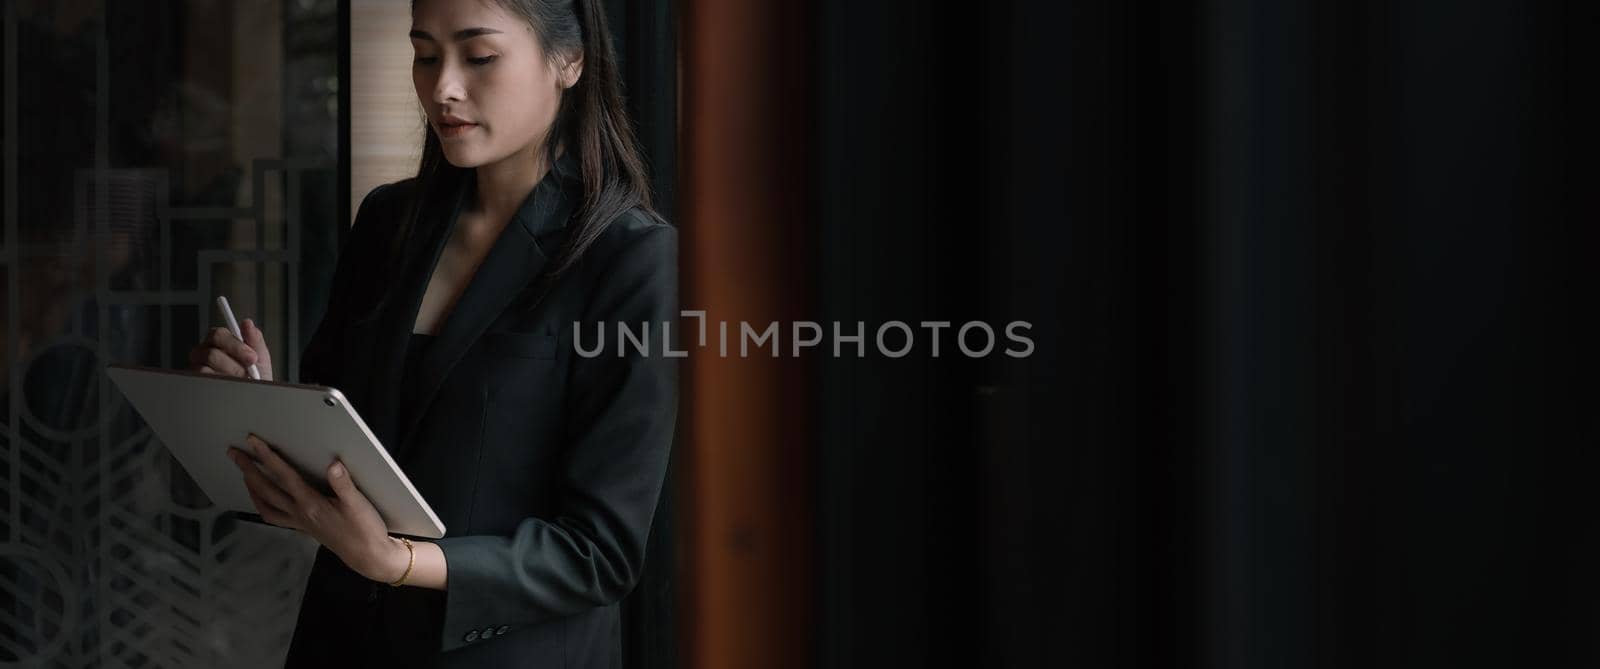 Attractive business asian woman using a digital tablet while standing in front of windows in an office building by nateemee